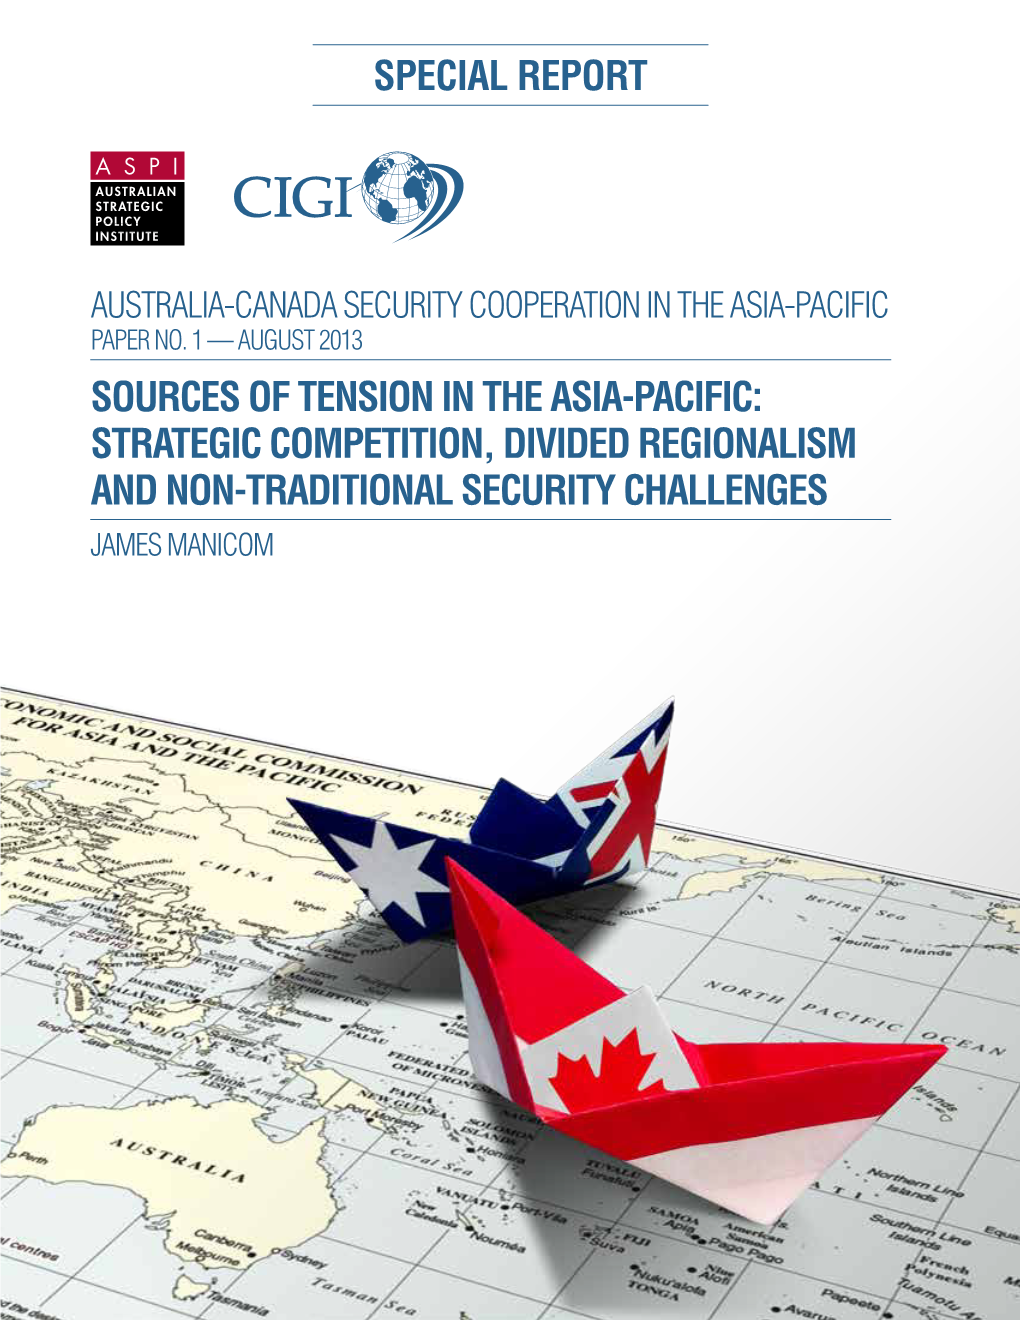 Sources of Tension in the Asia-Pacific: Strategic Competition, Divided Regionalism and Non-Traditional Security Challenges James Manicom